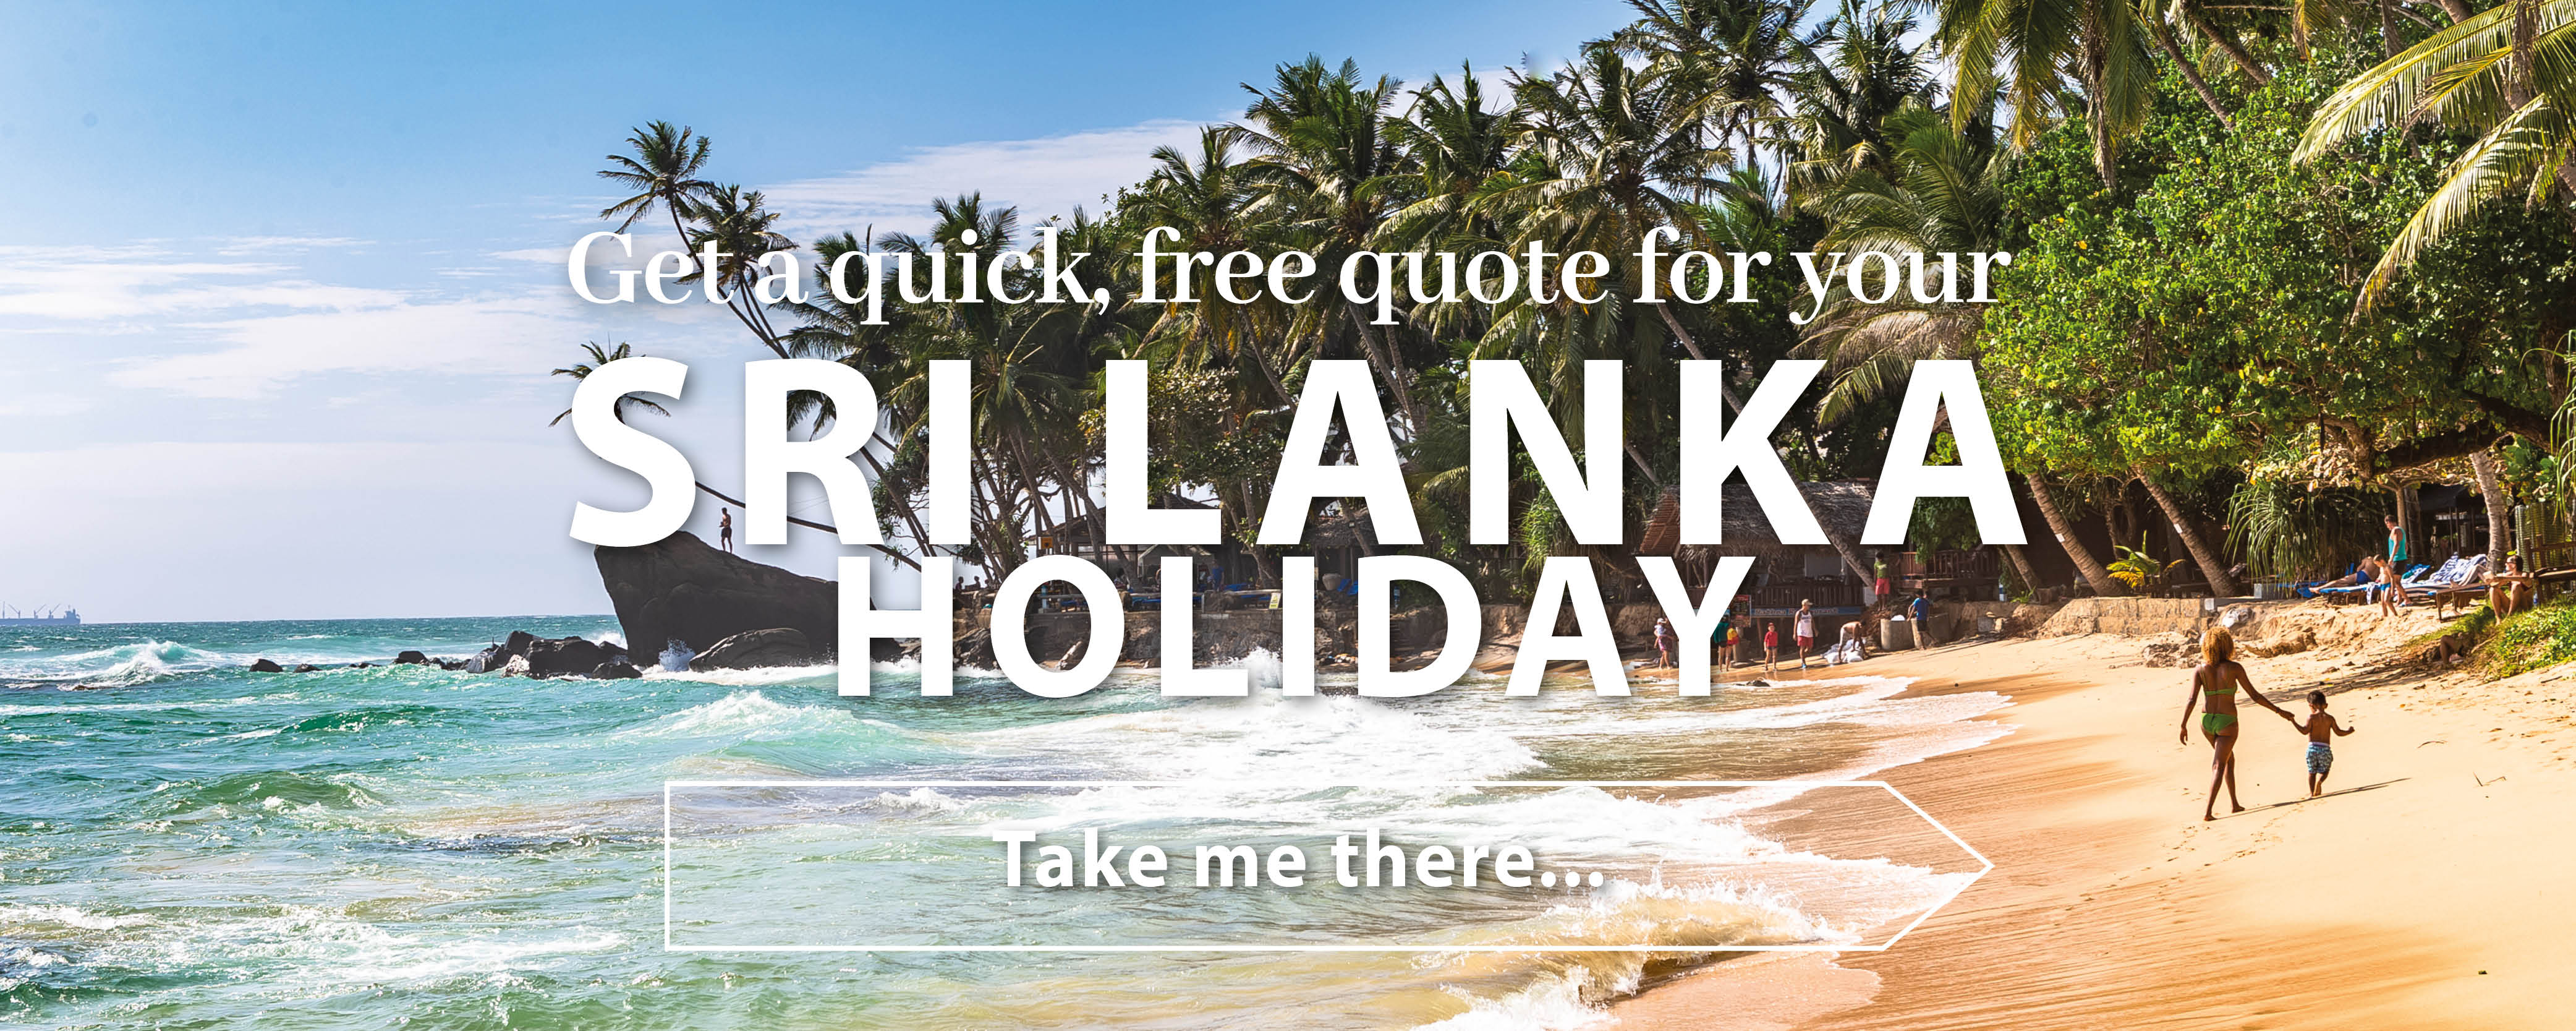 Sri Lanka holiday get a quote